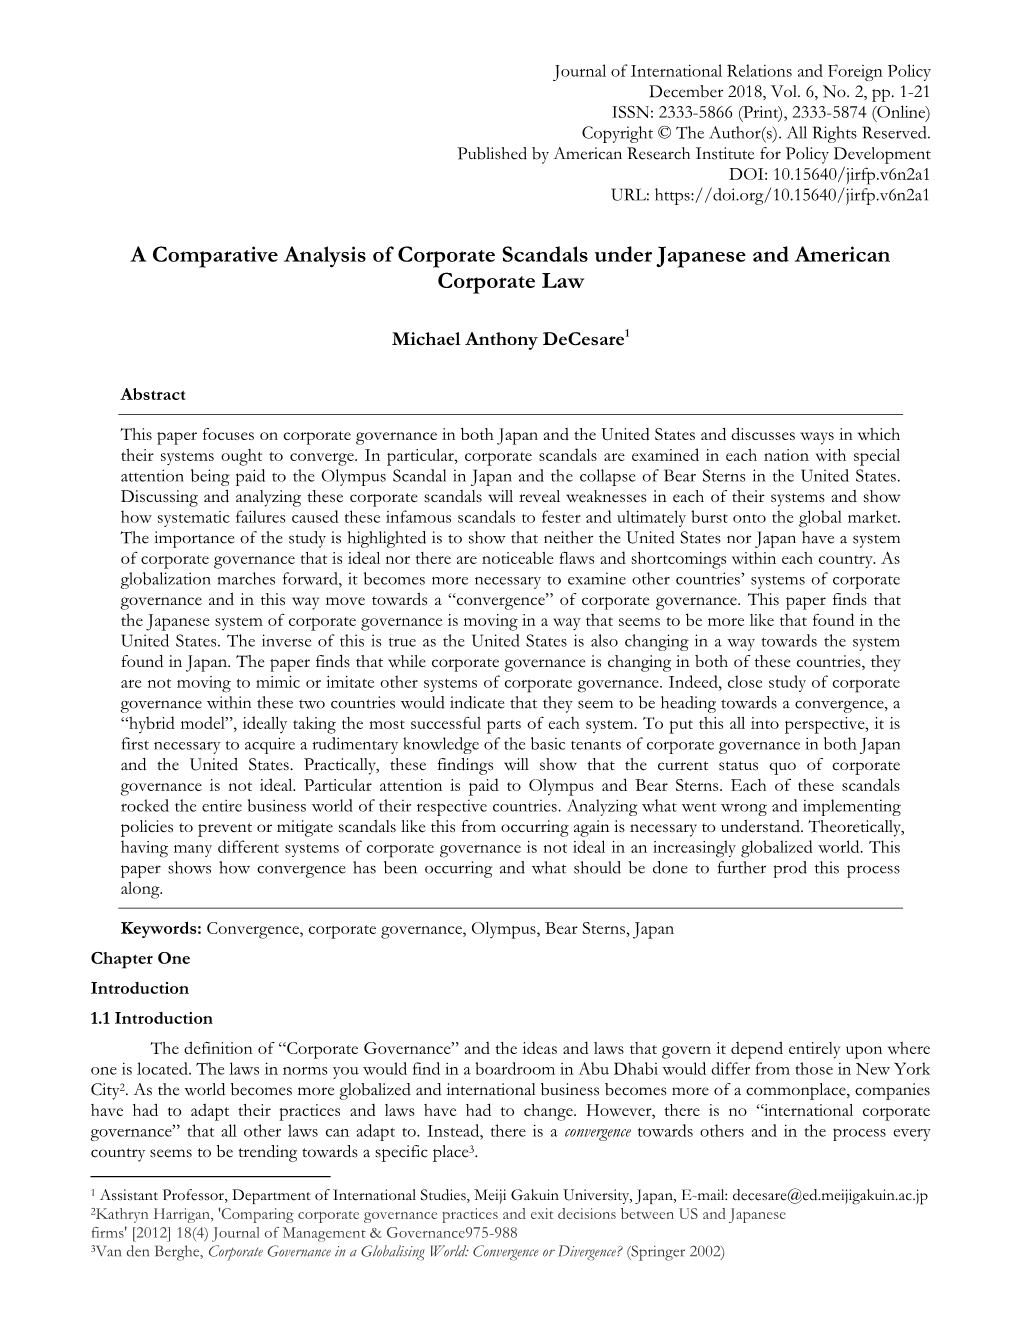 A Comparative Analysis of Corporate Scandals Under Japanese and American Corporate Law